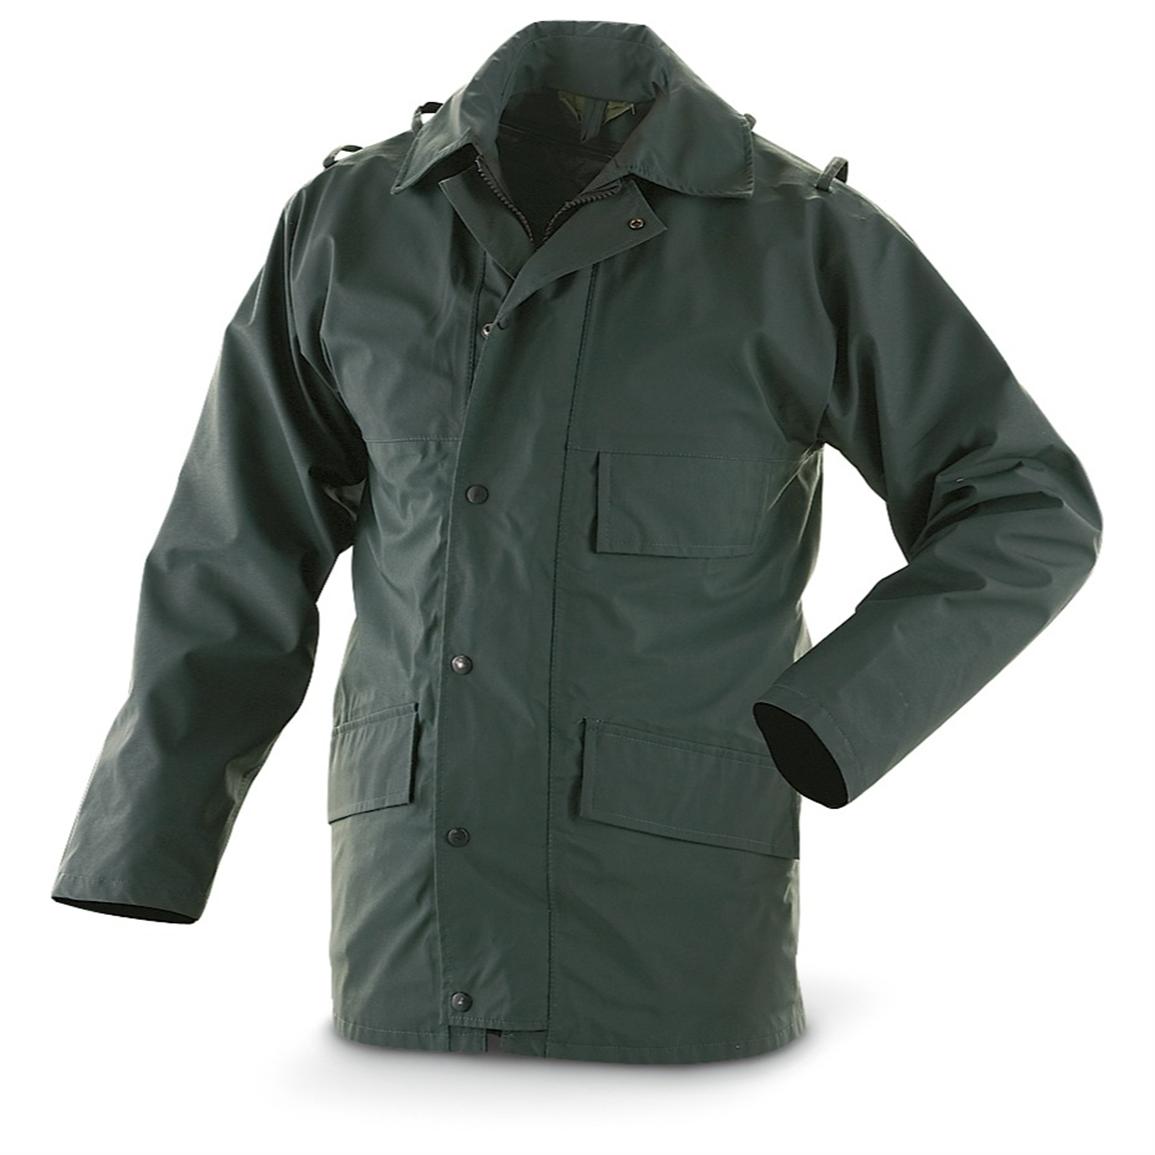 Used Irish Police GORE - TEX® Parka with Liner, Green - 197468 ...